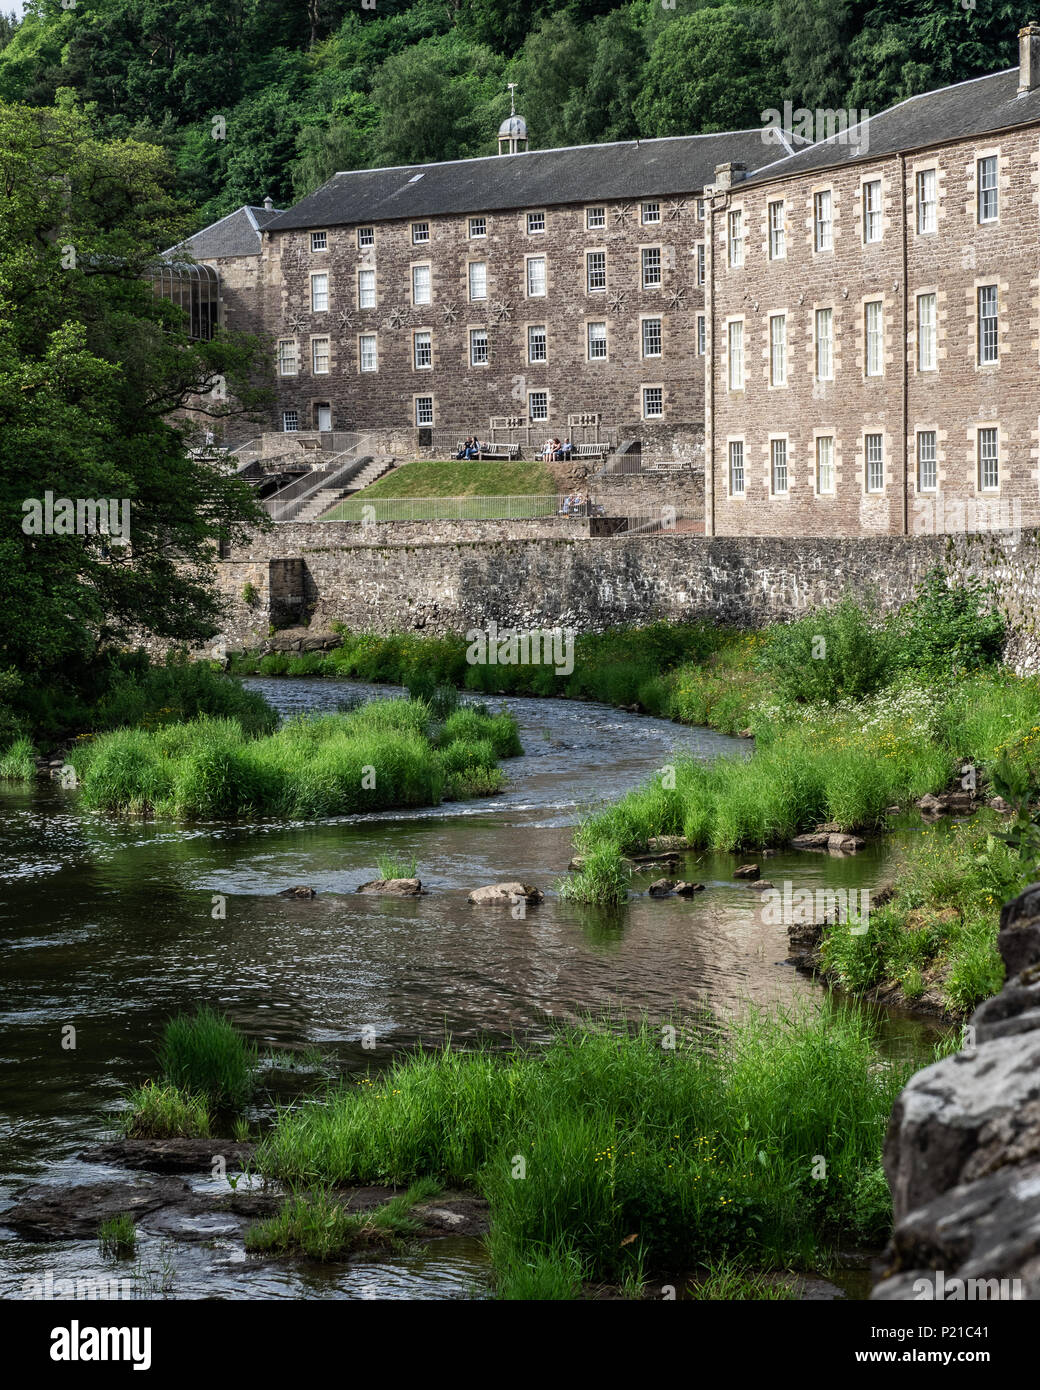 The New Lanark World Heritage Site a unique 18th century mill village sitting alongside the picturesque River Clyde in Scotland Stock Photo